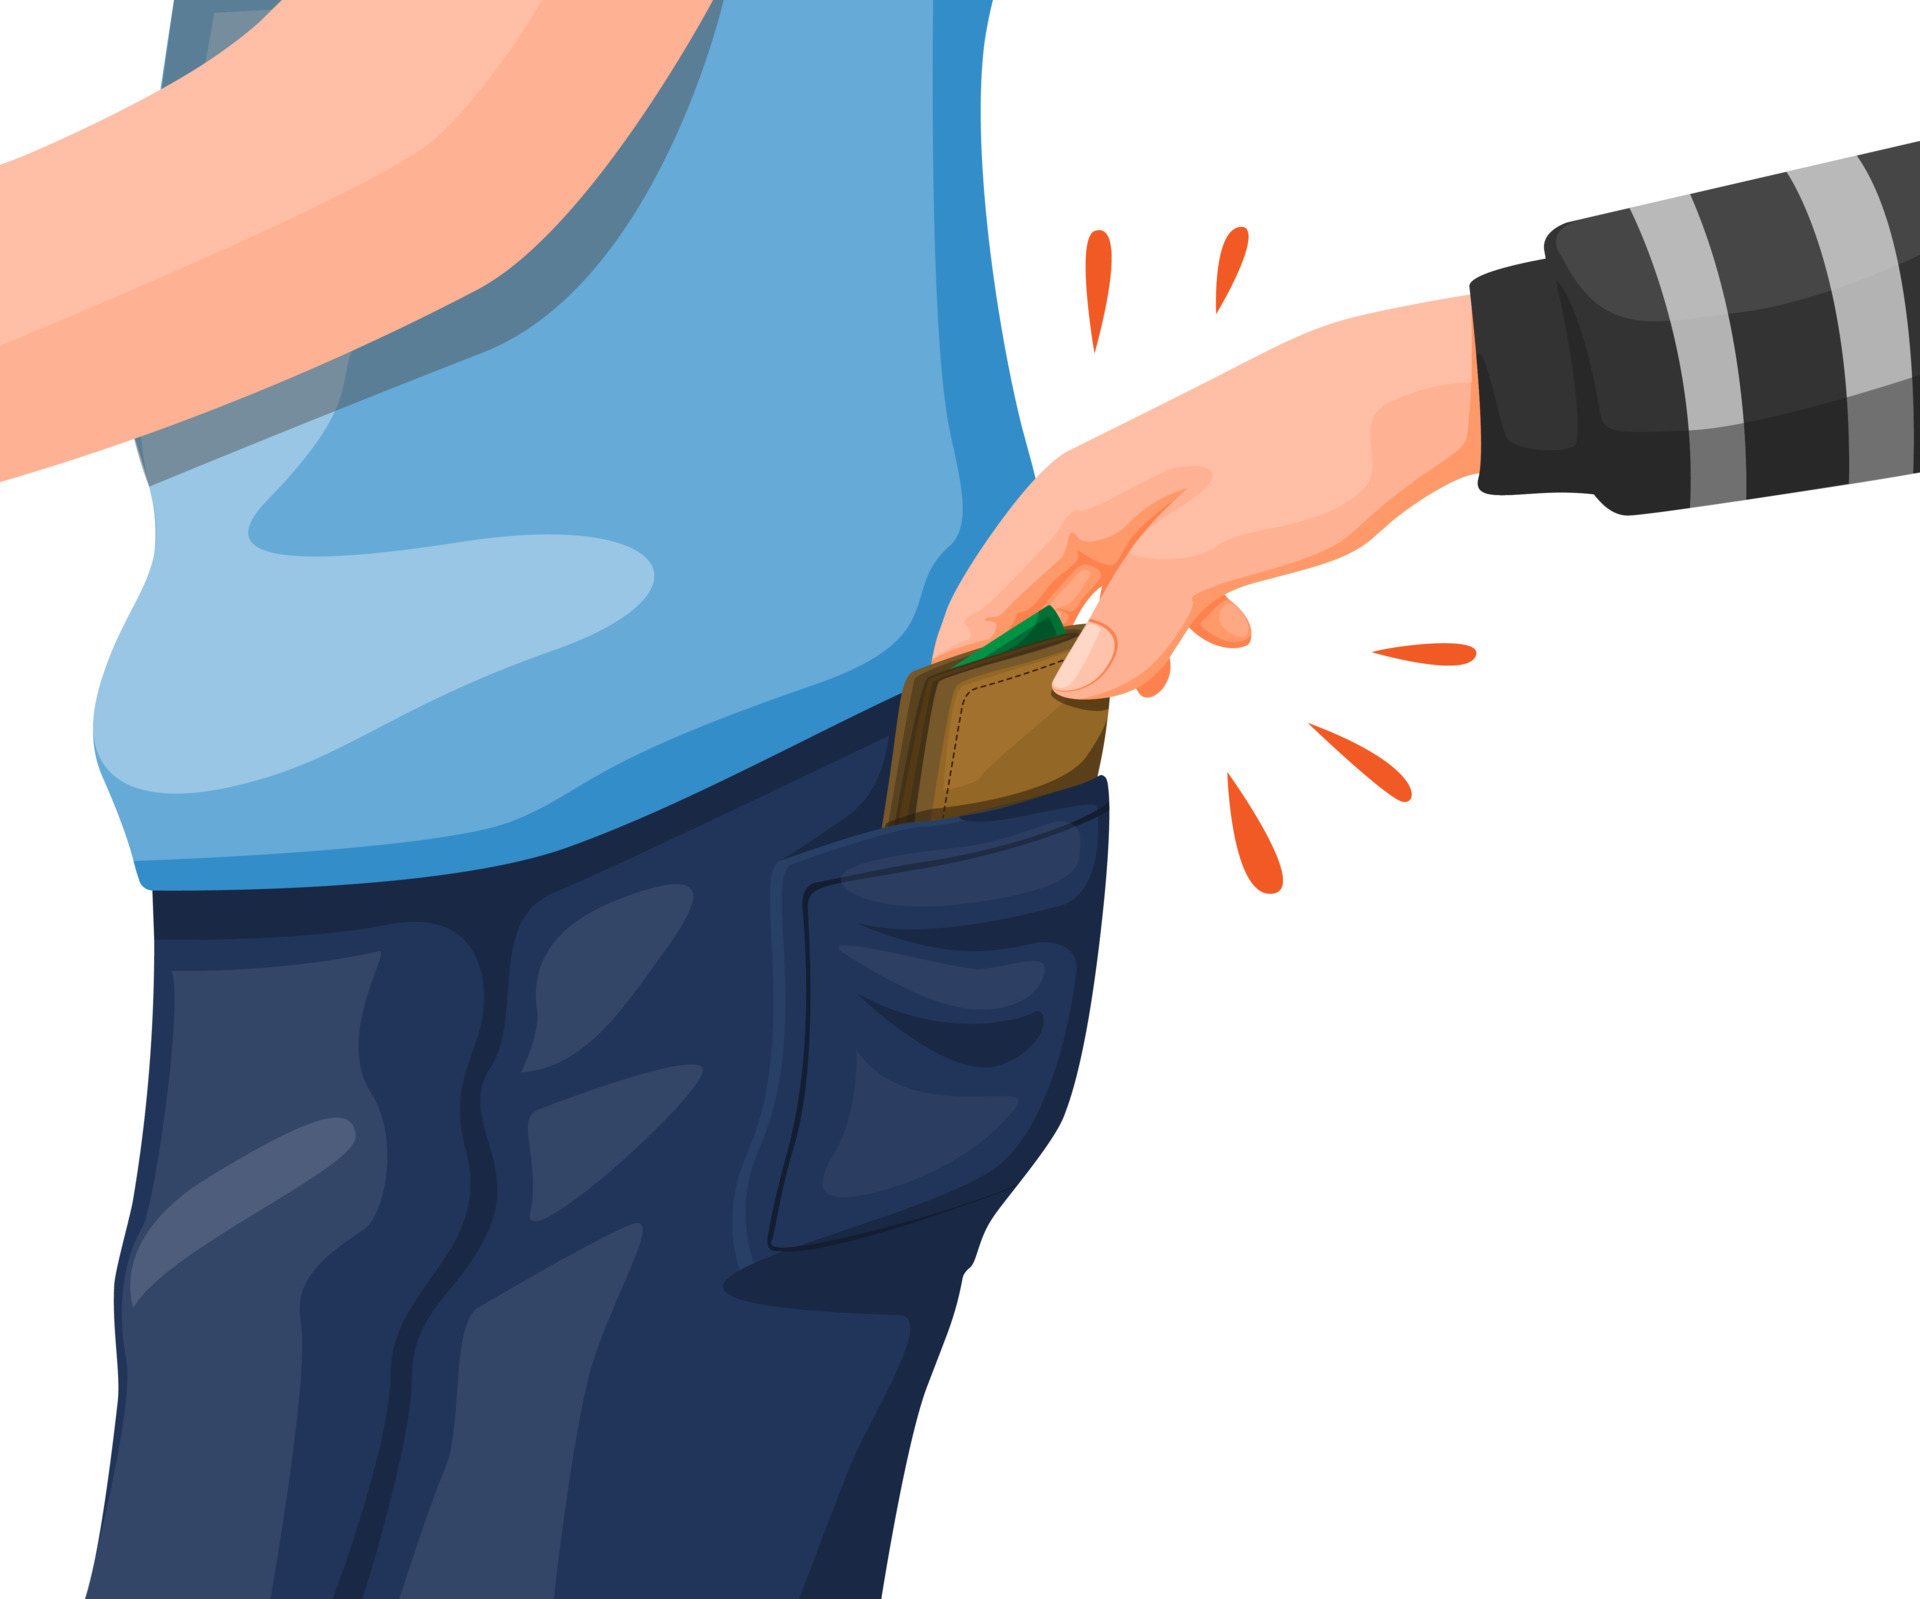 https://static.vecteezy.com/system/resources/previews/004/599/837/original/pickpocket-crime-thief-hand-steal-wallet-from-jeans-pocket-illustration-concept-in-cartoon-isolated-in-white-background-vector.jpg